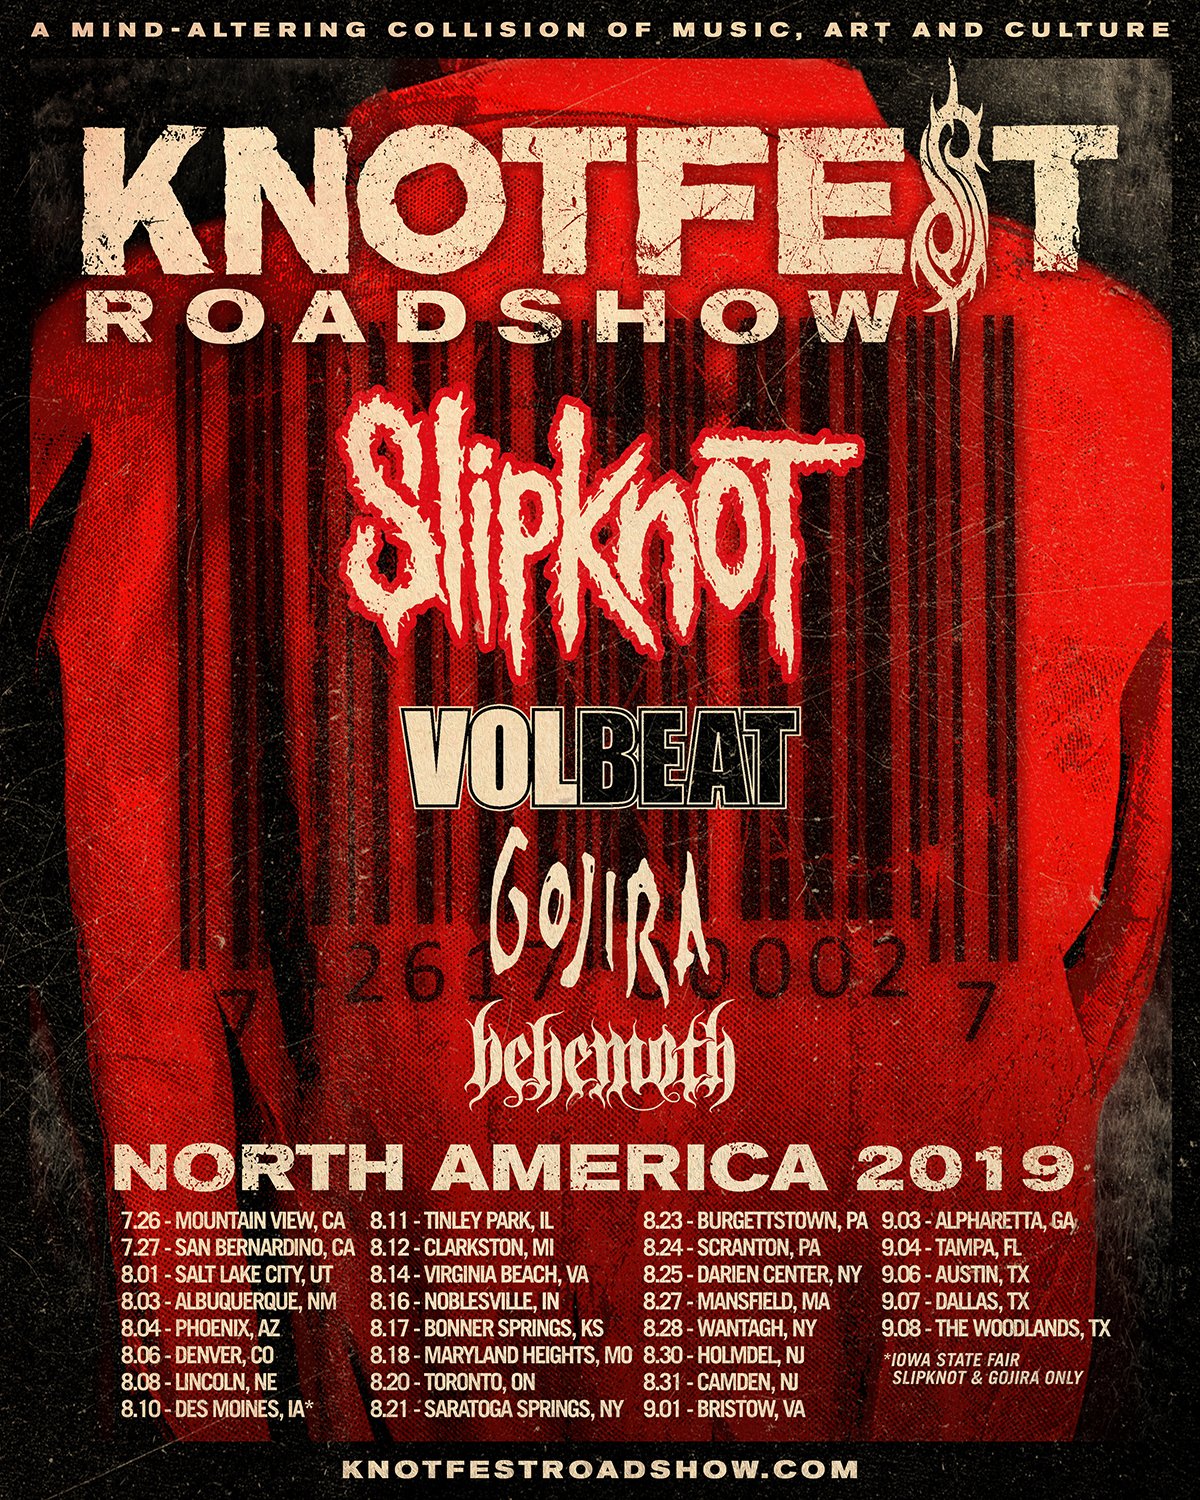 Slipknot on Twitter "Which show are you coming to? Tickets & VIP